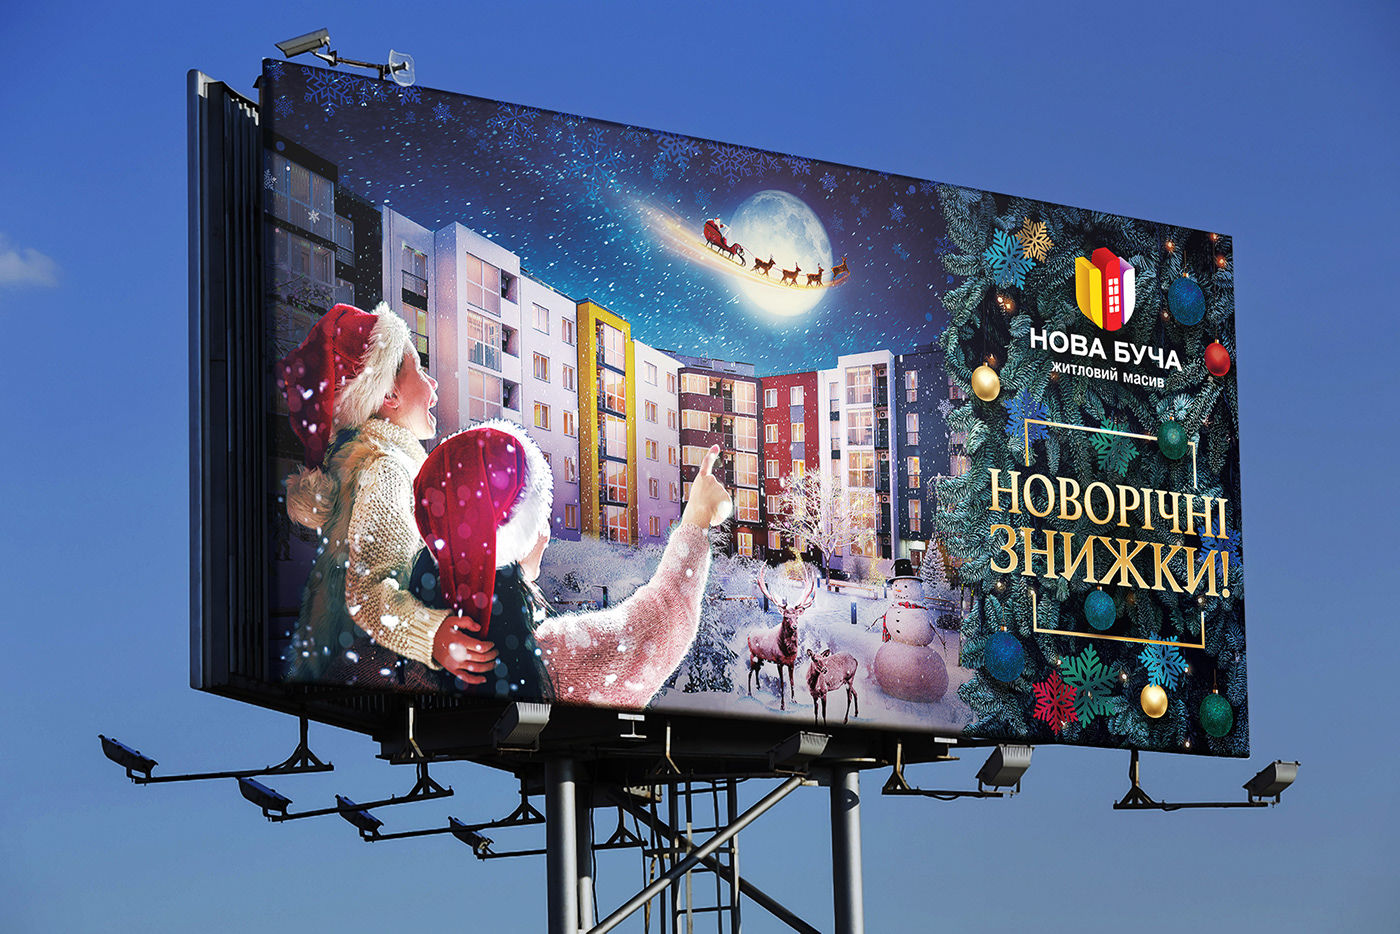 Billboards residential complex outdoor advertising Christmas